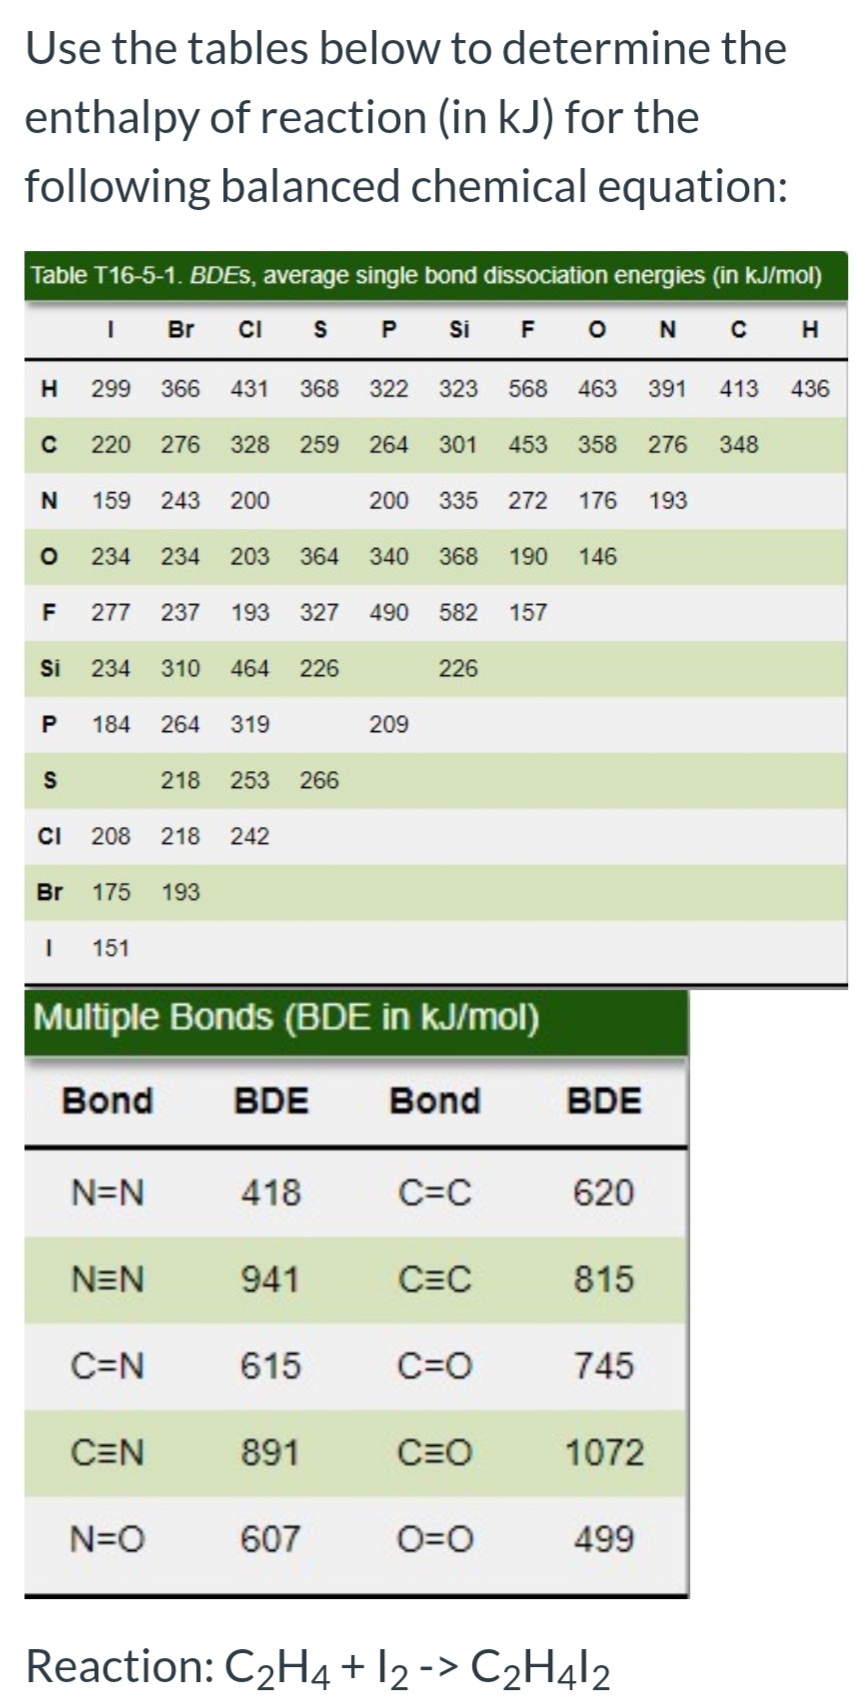 Use the tables below to determine the
enthalpy of reaction (in kJ) for the
following balanced chemical equation:
Table T16-5-1. BDES, average single bond dissociation energies (in kJ/mol)
I Br CI s P si F ONC H
299
366
431
368
322
323
568
463
391
413
436
220
276
328
259
264
301
453
358
276
348
N
159
243
200
200
335
272
176
193
234
234
203
364
340
368
190
146
F
277
237
193
327
490
582
157
Si
234
310
464
226
226
184
264
319
209
218
253
266
CI
208
218
242
Br
175
193
I 151
Multiple Bonds (BDE in kJ/mol)
Bond
BDE
Bond
BDE
N=N
418
C=C
620
NEN
941
C=C
815
C=N
615
C=0
745
CEN
891
C=O
1072
N=O
607
O=0
499
Reaction: C2H4 + l2 -> C2H412
P.
